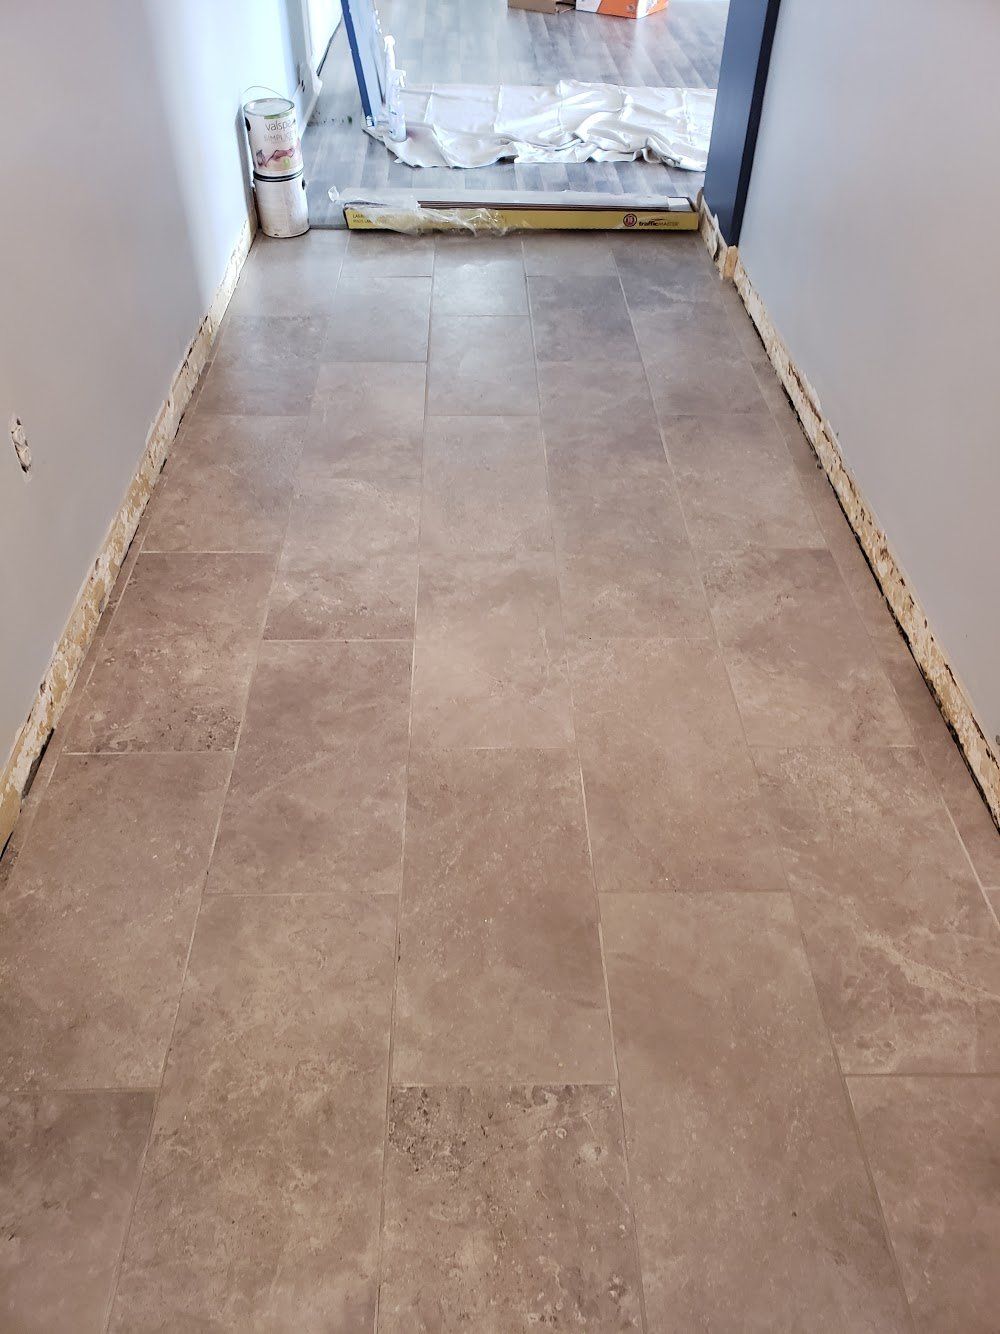 In progress photo - Hallway entry way with new large format ceramic tile in Elkins Park tile flooring installation